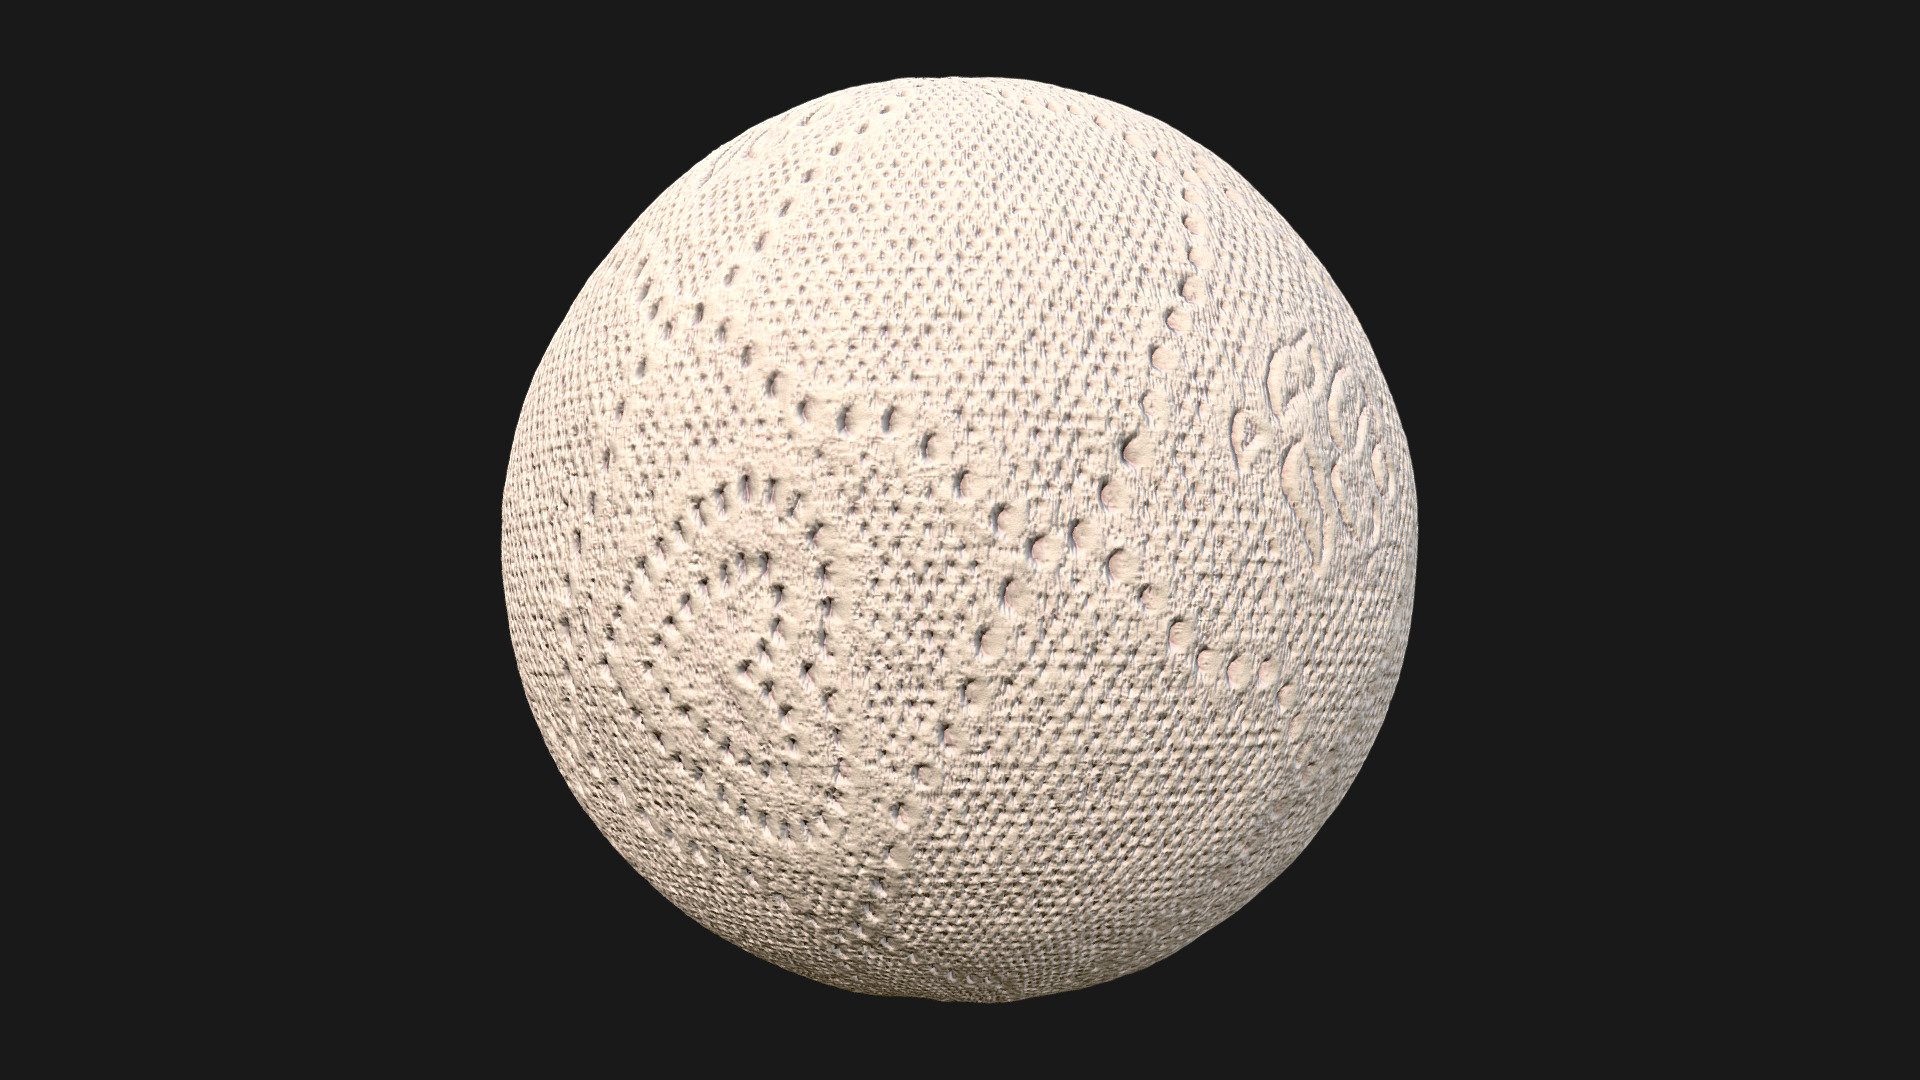 Toilet paper 2K PBR texture.

Resolution - 2048 x 2048 px

Seamless - No

PBR - Yes

Format - TIFF and JPEG

Bit depth - 16bit for height (TIFF only), 8bit for the rest

Maps - Albedo, AO, Glossiness, Roughness, Height, Normals (DirectX, -Y)

Coverage area - 12 x 12 cm

Scanned - No

Rendered in Marmoset Toolbag 3d model